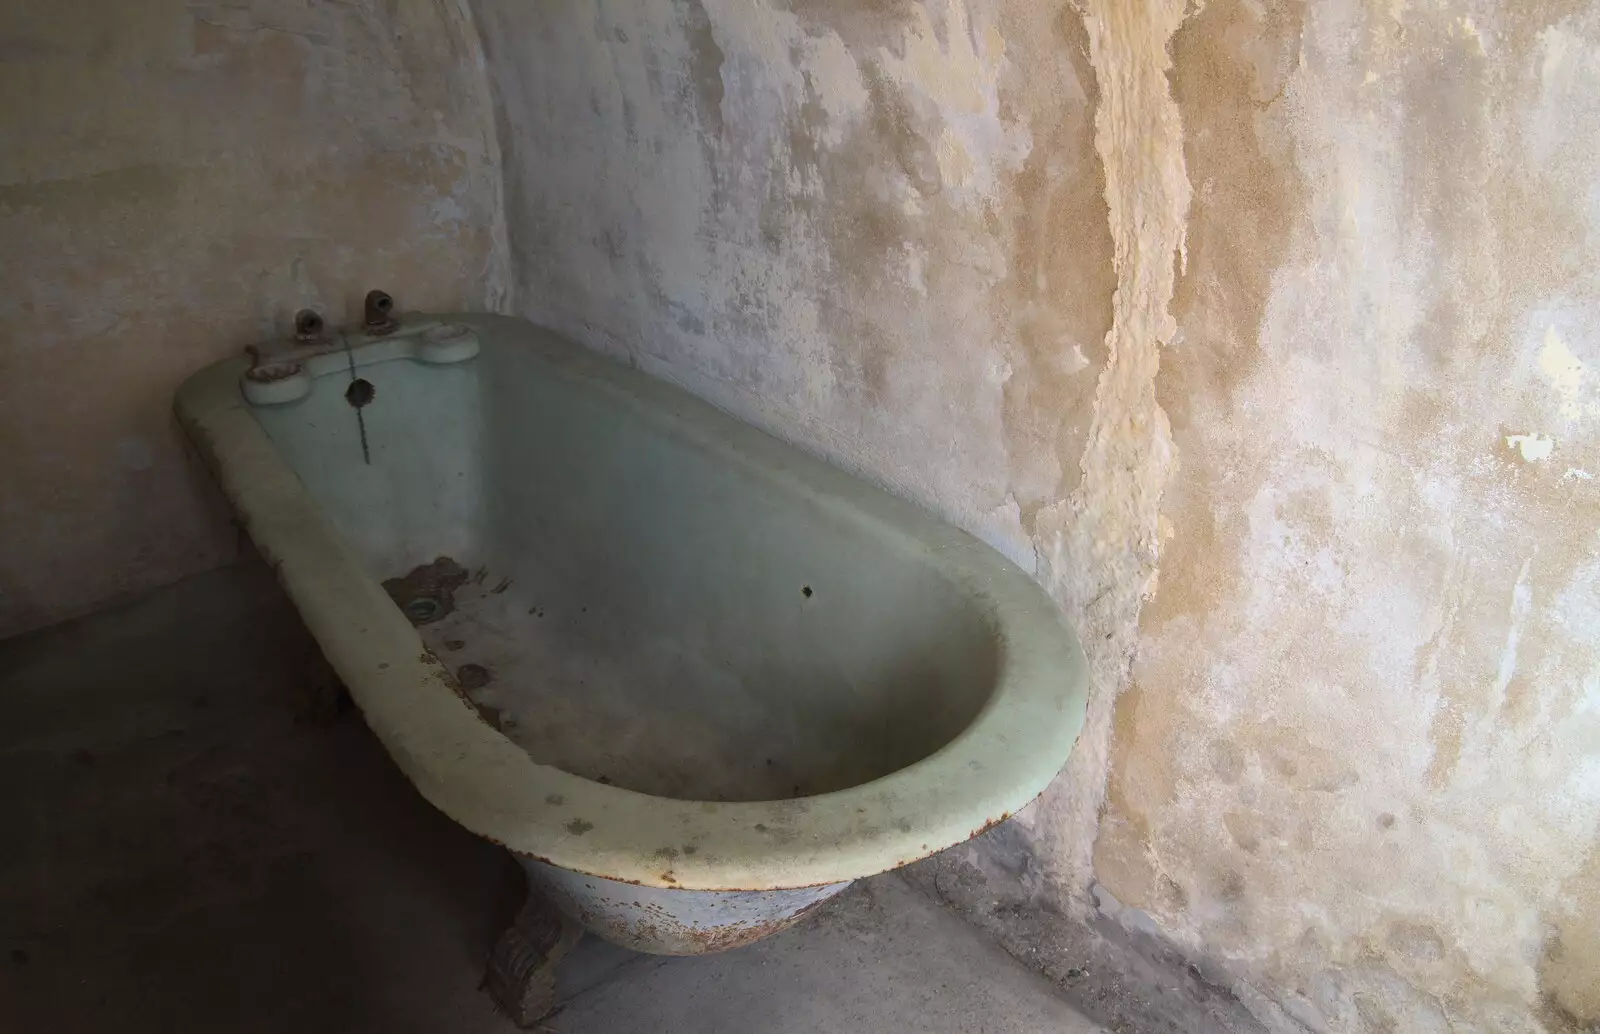 The luxury of a cast-iron bath, from A Trip to Landguard Fort, Felixstowe, Suffolk - 16th October 2022